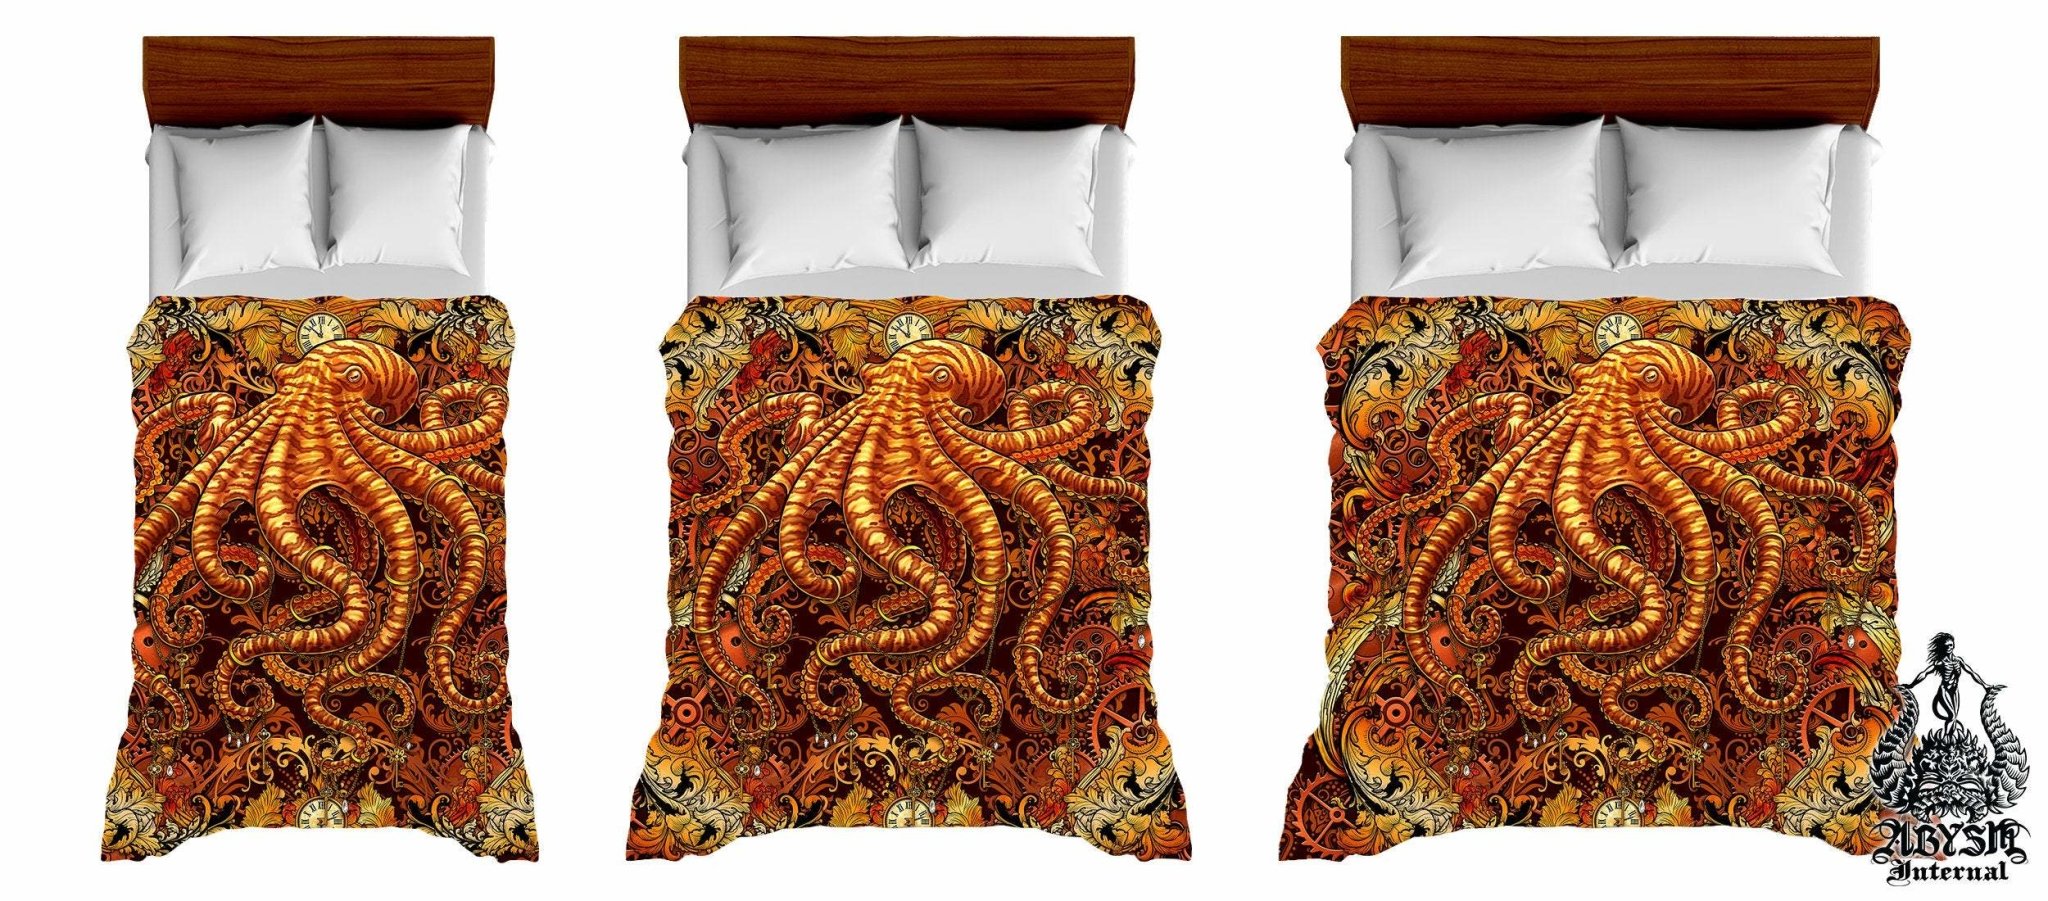 Steampunk Bedding Set, Comforter and Duvet, Beach Bed Cover, Coastal Bedroom Decor, King, Queen and Twin Size - Octopus - Abysm Internal